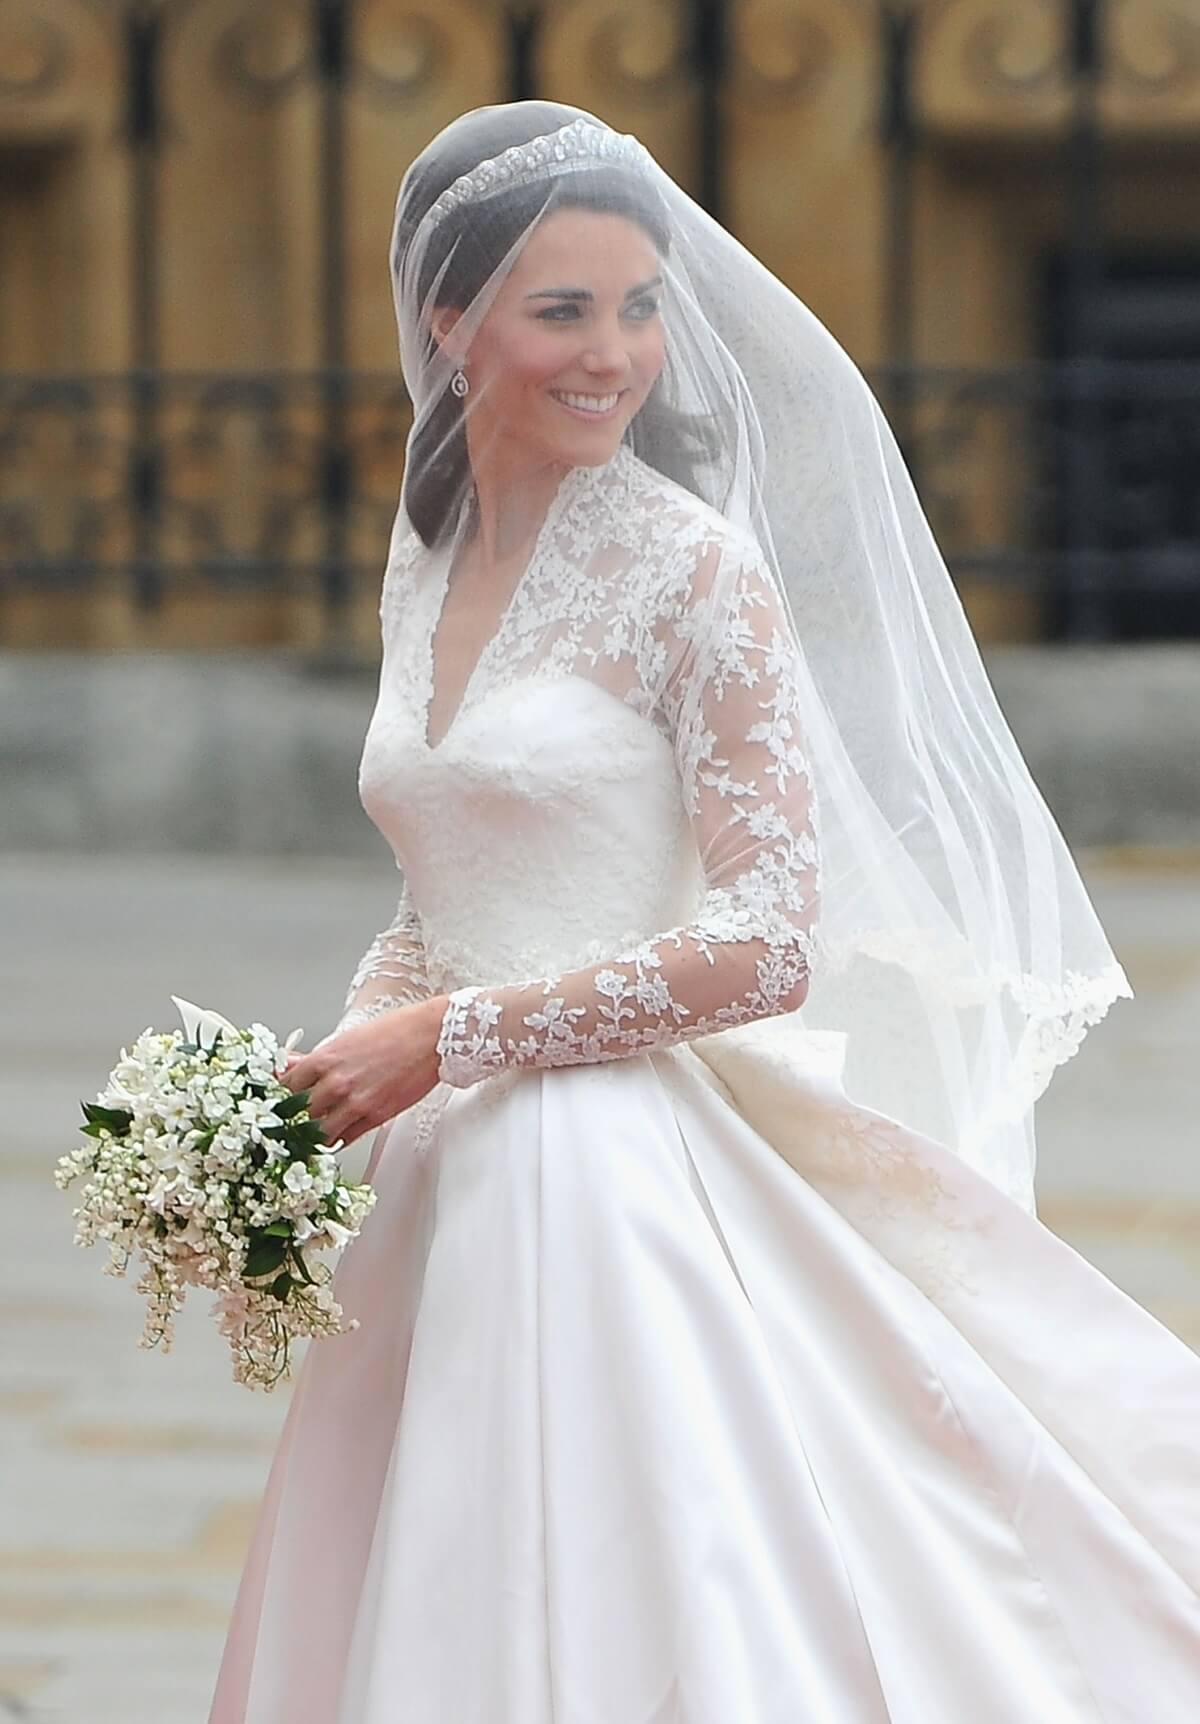 Kate Middleton arrives at Westminster Abbey for her royal wedding to Prince William